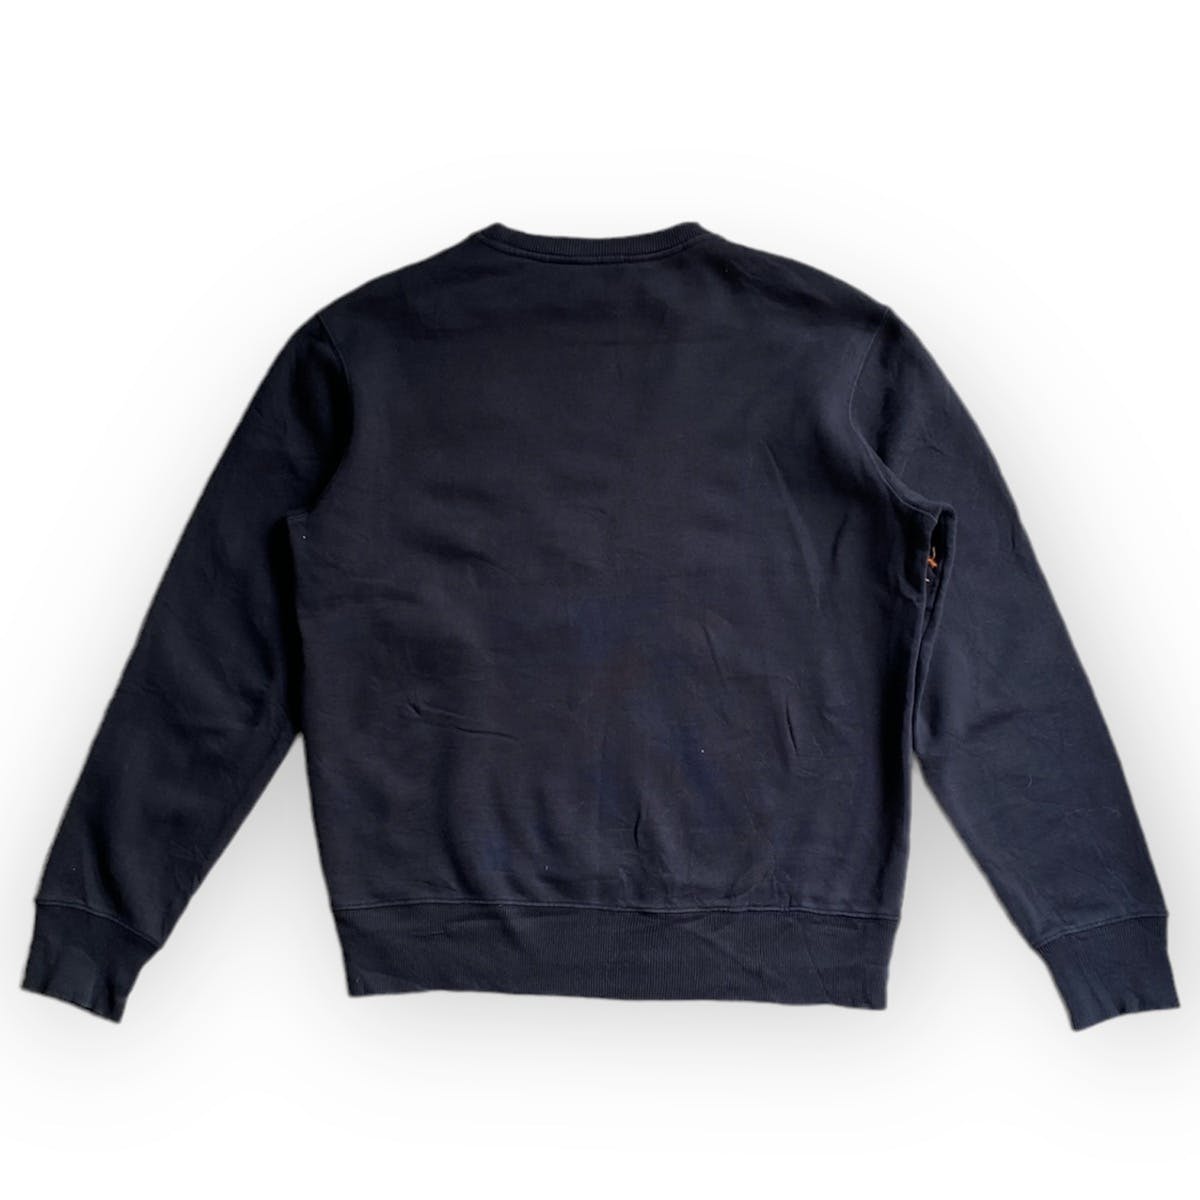 Acne Studios Carly Flame Sweater - 2